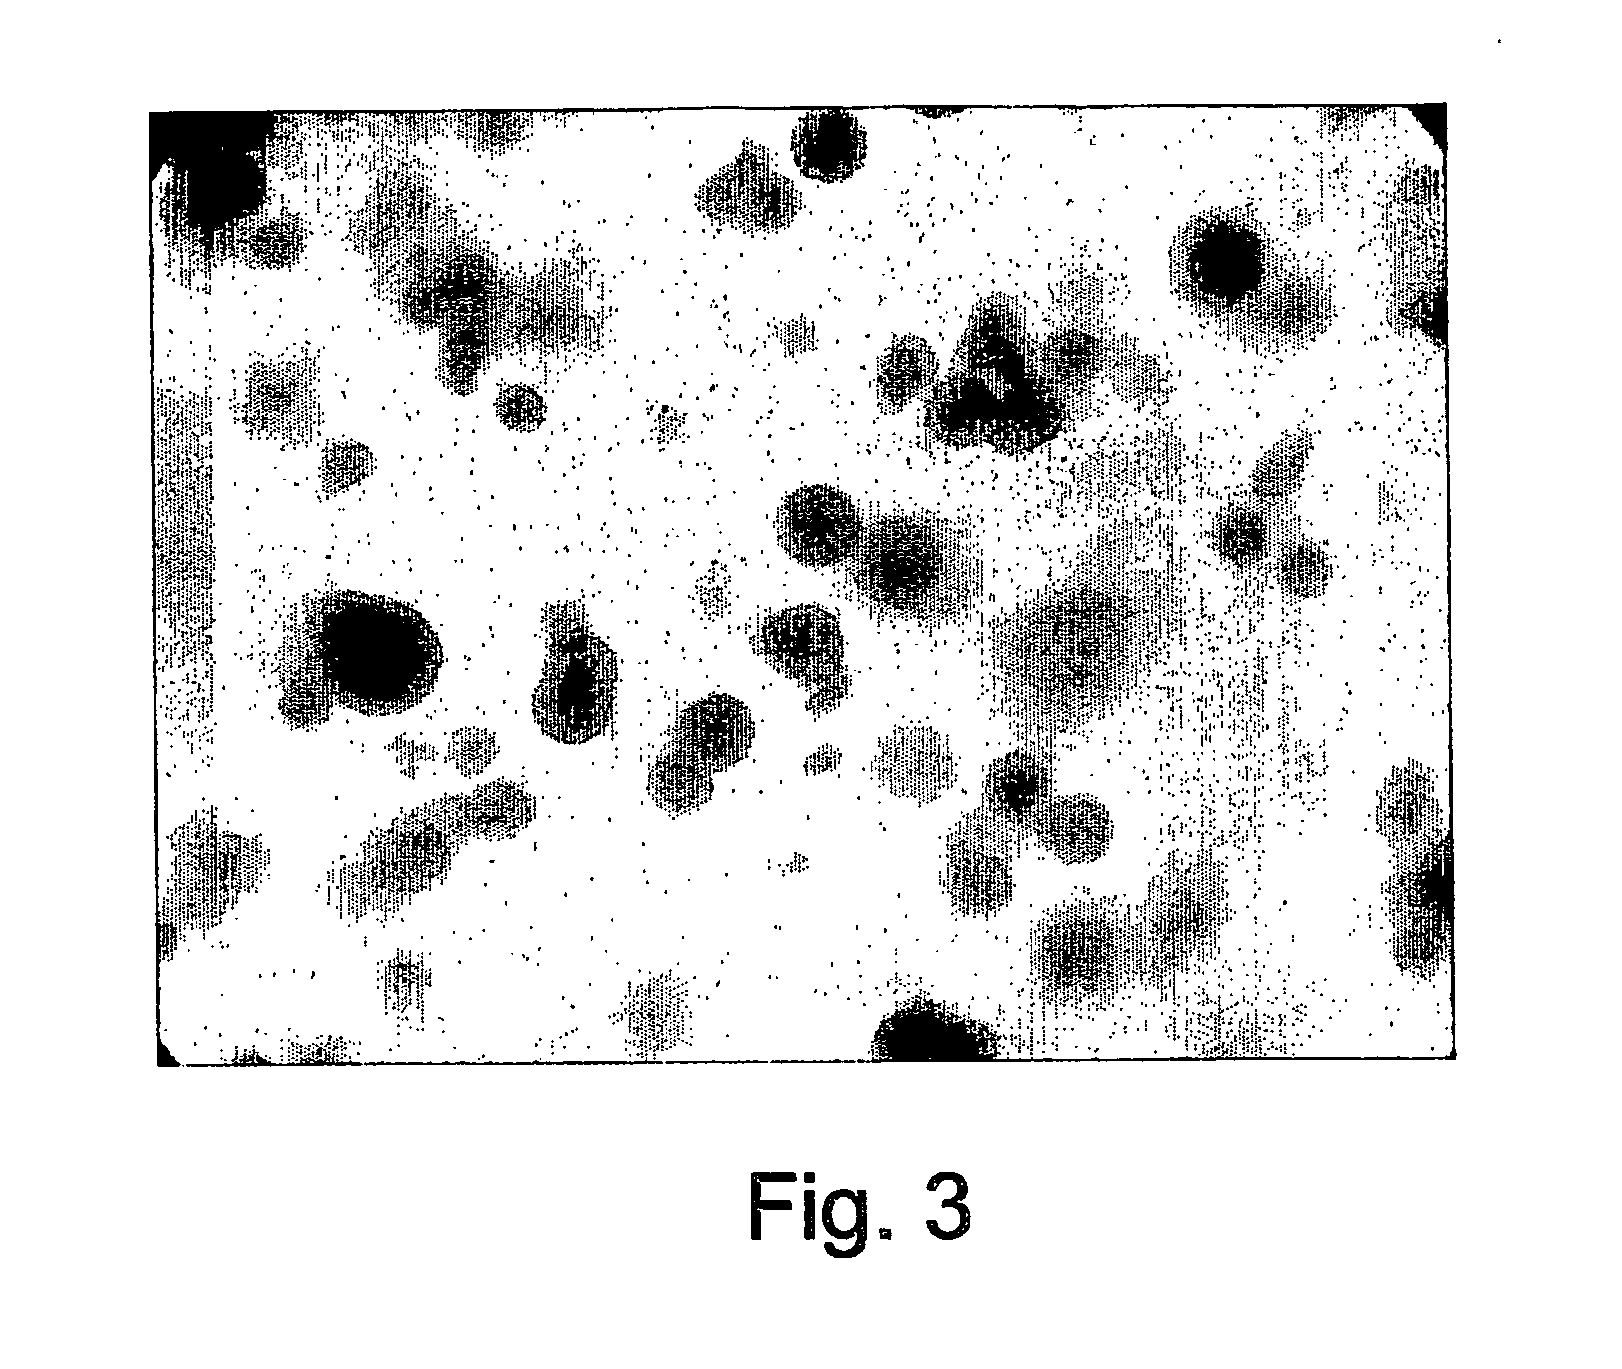 Agent-encapsulating micro-and nanoparticles, methods for preparation of same and products containing same